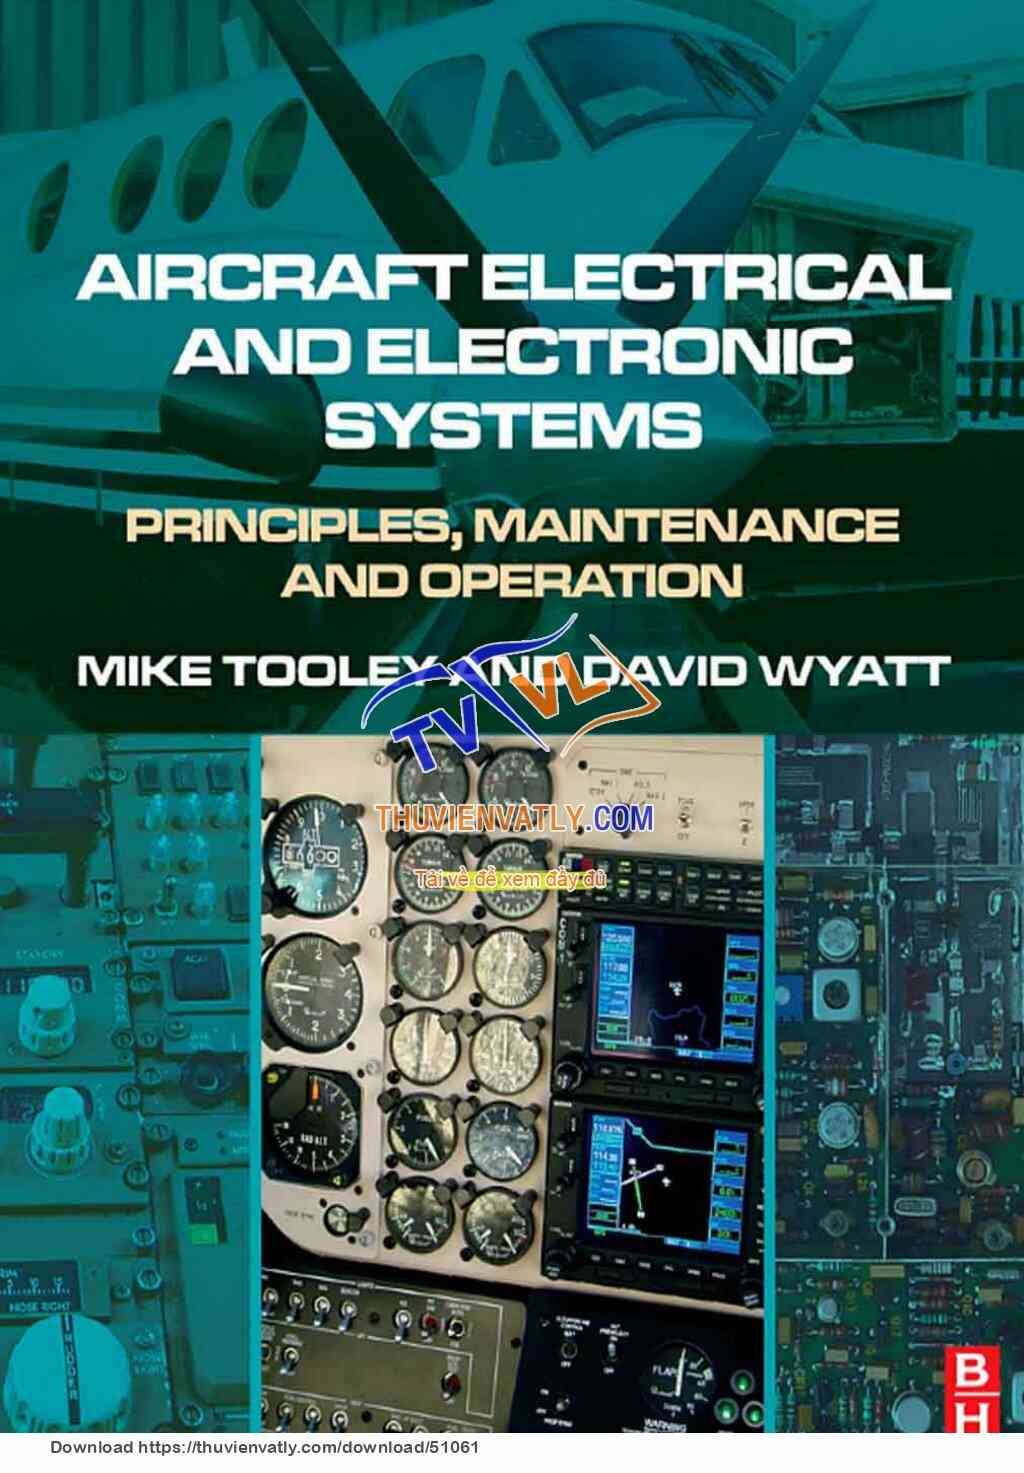 Aircraft electric and electronic system